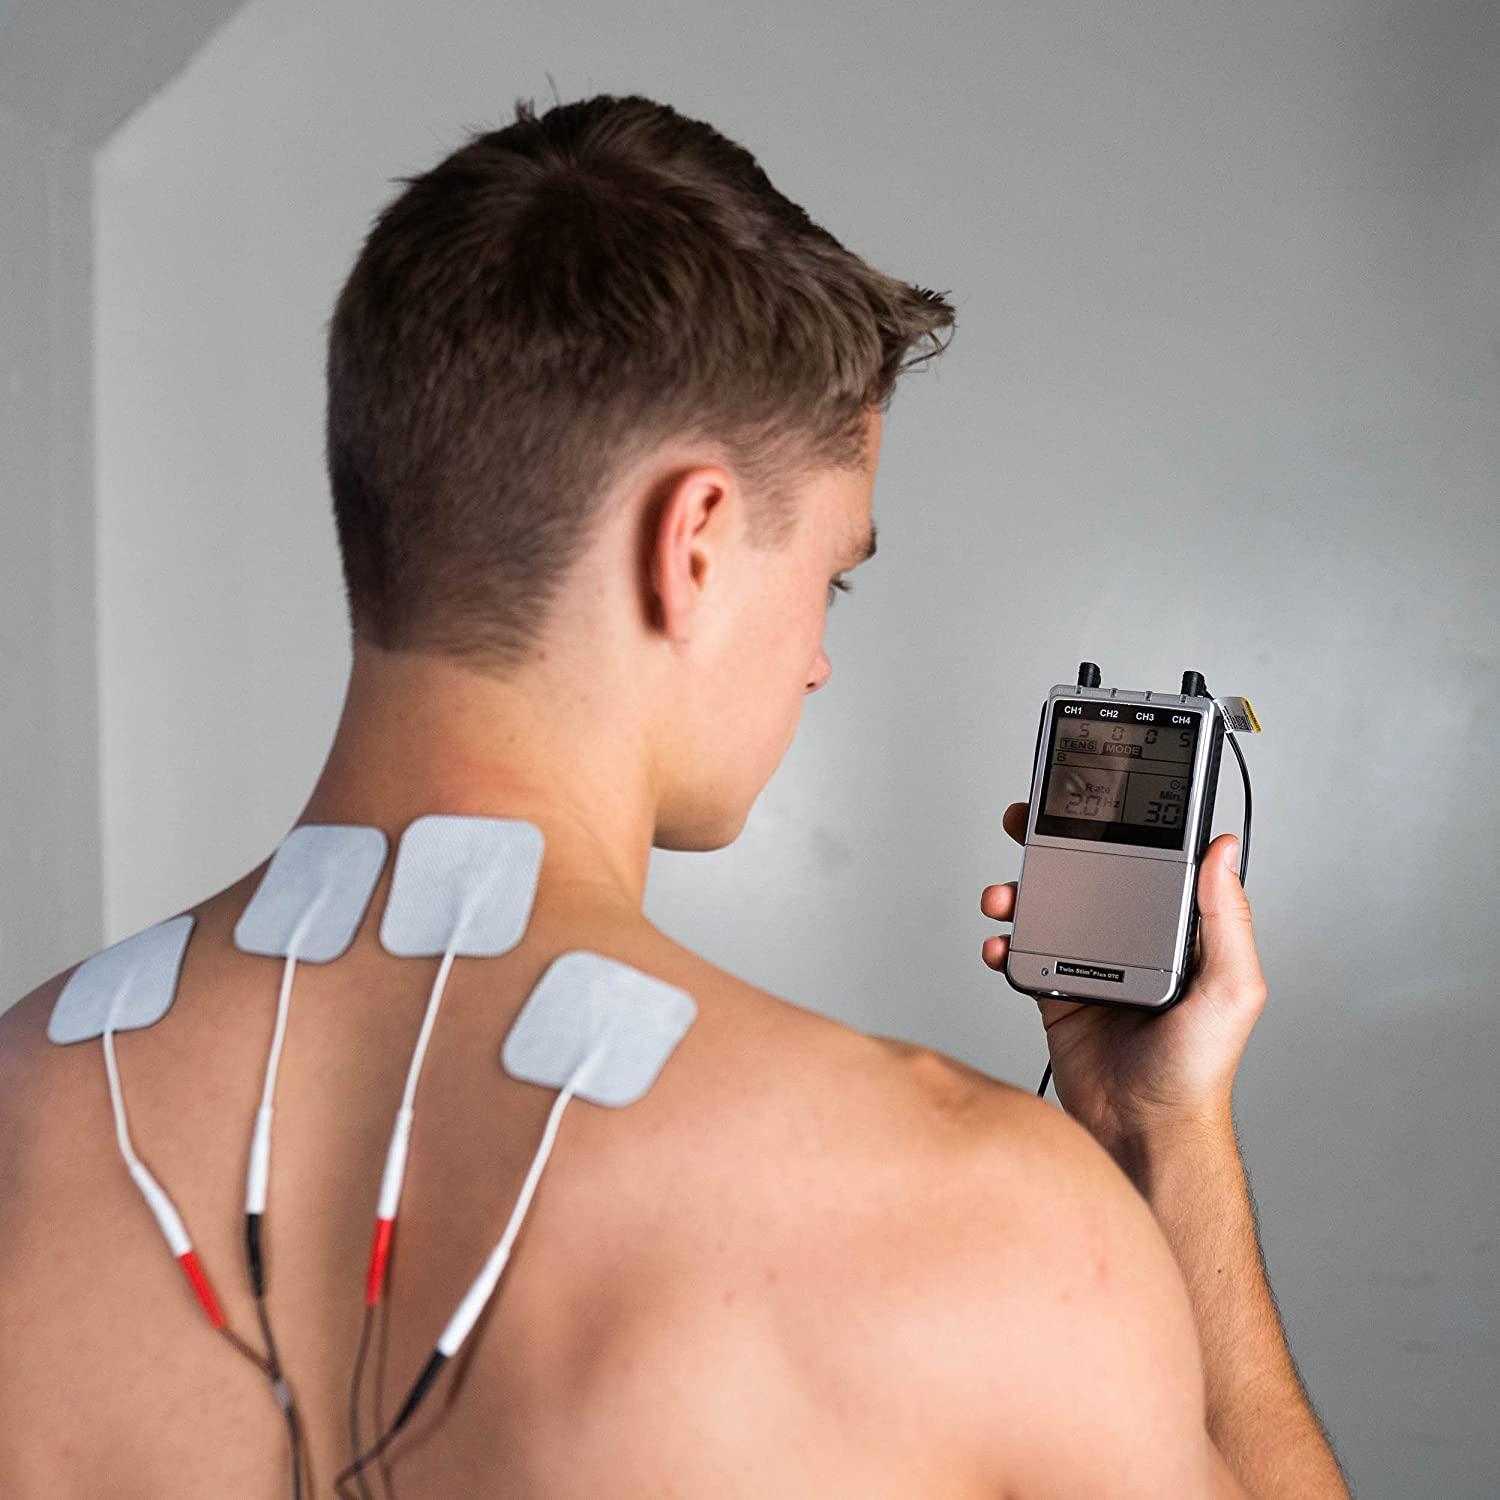  Roscoe Medical TENS Unit and EMS Muscle Stimulator - 4-Channel  OTC TENS Machine for Back Pain Relief, Lower Back Pain Relief, Neck Pain,  Includes Case, Pain Relief, Muscle Recovery : Health